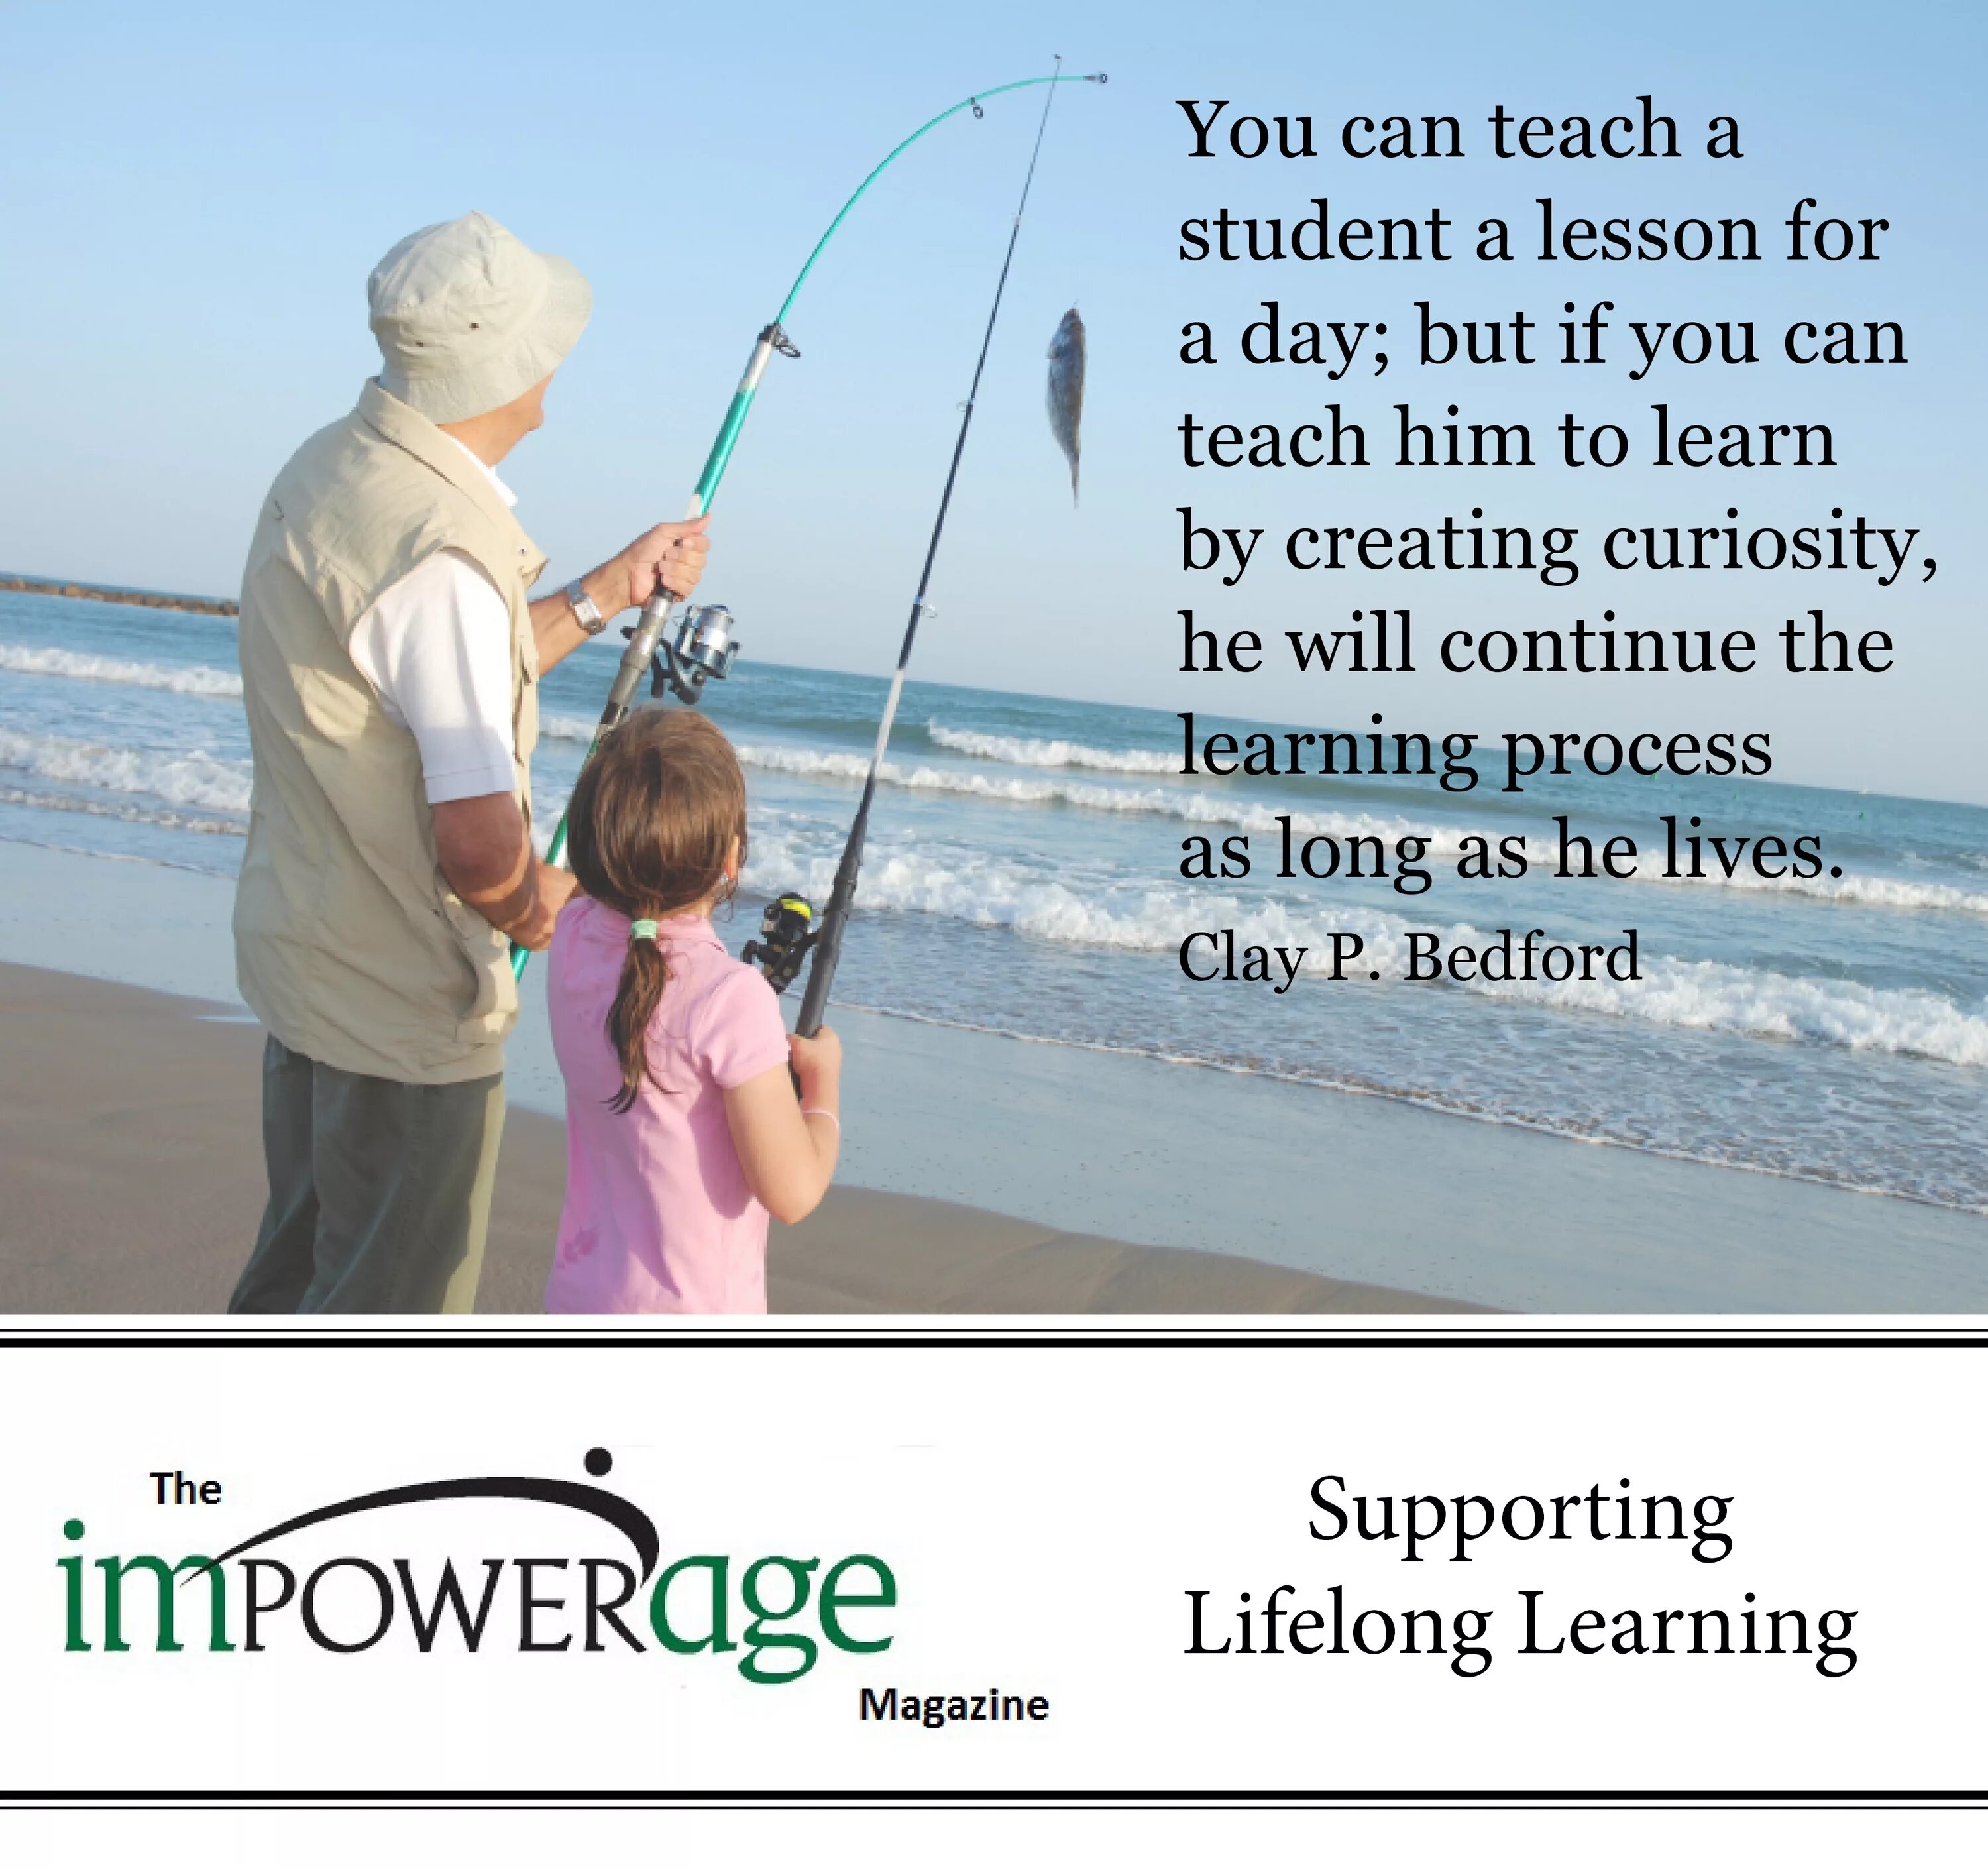 Lifelong Learning quotes. Quotes about lifelong Learning. Can you teach. You can teach a student a Lesson for Day but. I can teach you